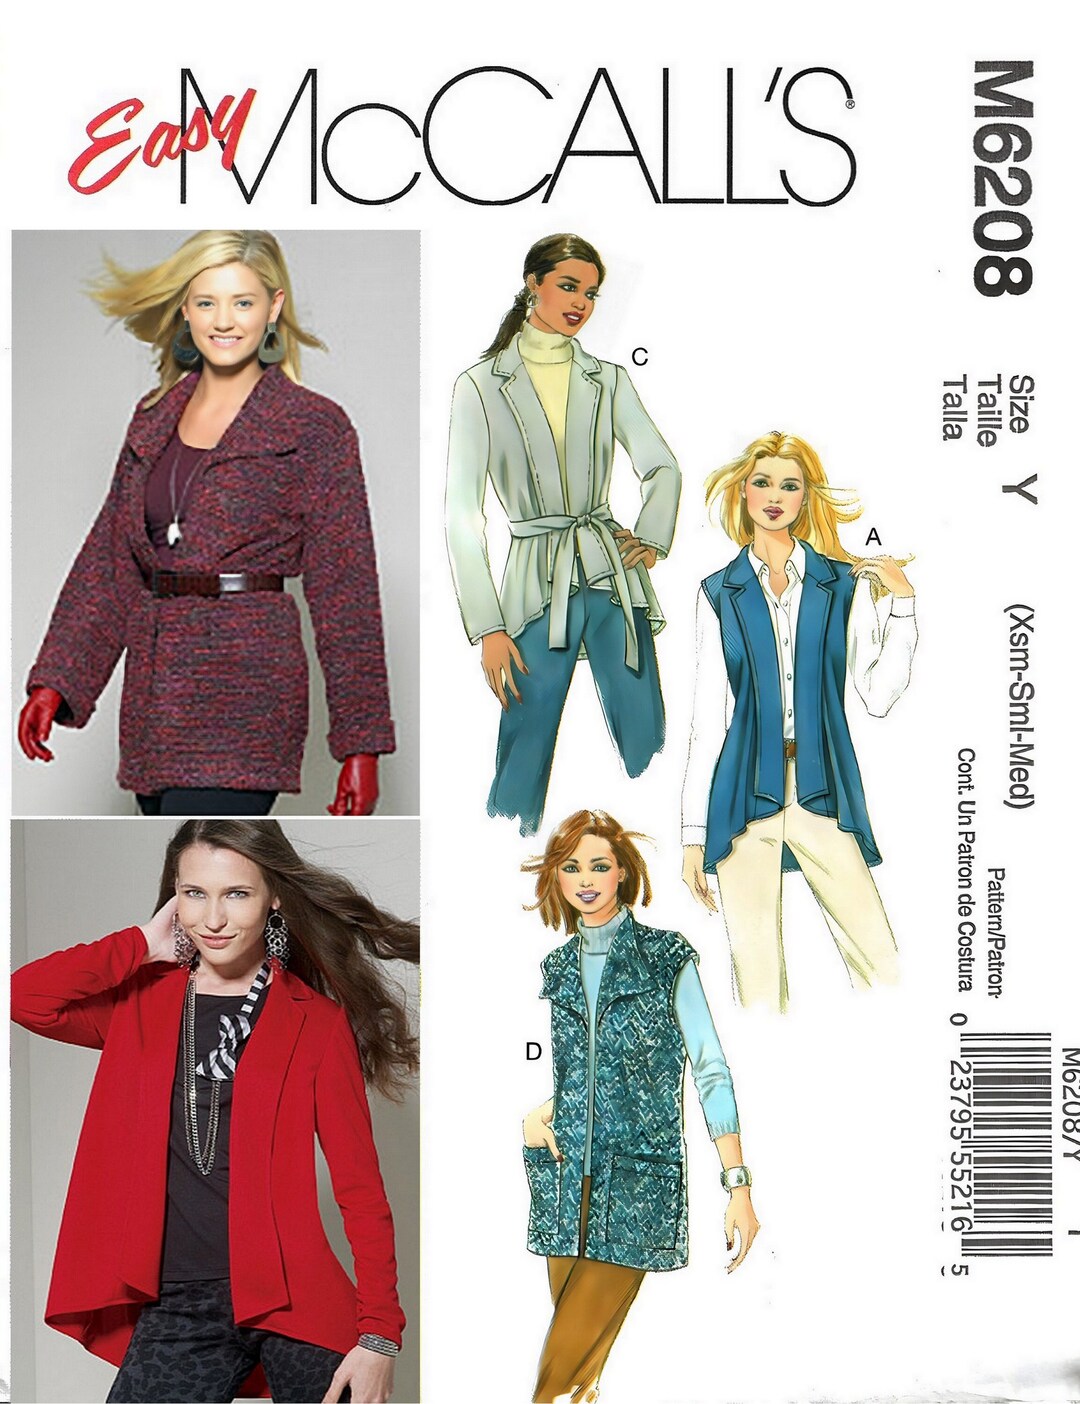 Mccalls M6208 Sewing Pattern for Misses Easy Knit Cardigans - Etsy